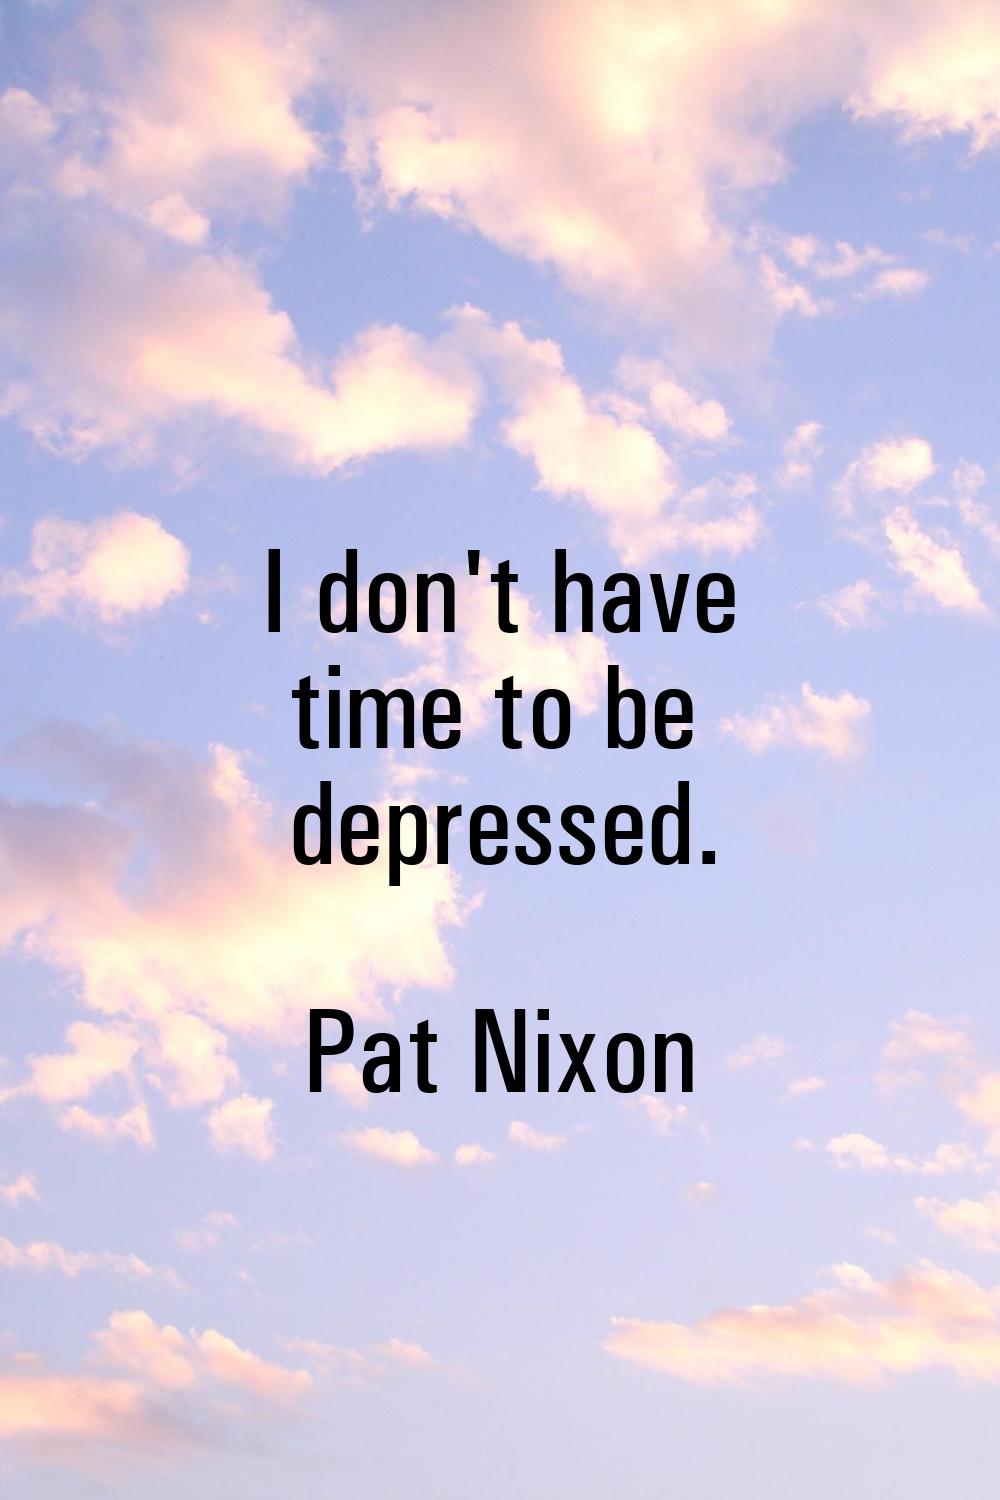 I don't have time to be depressed.